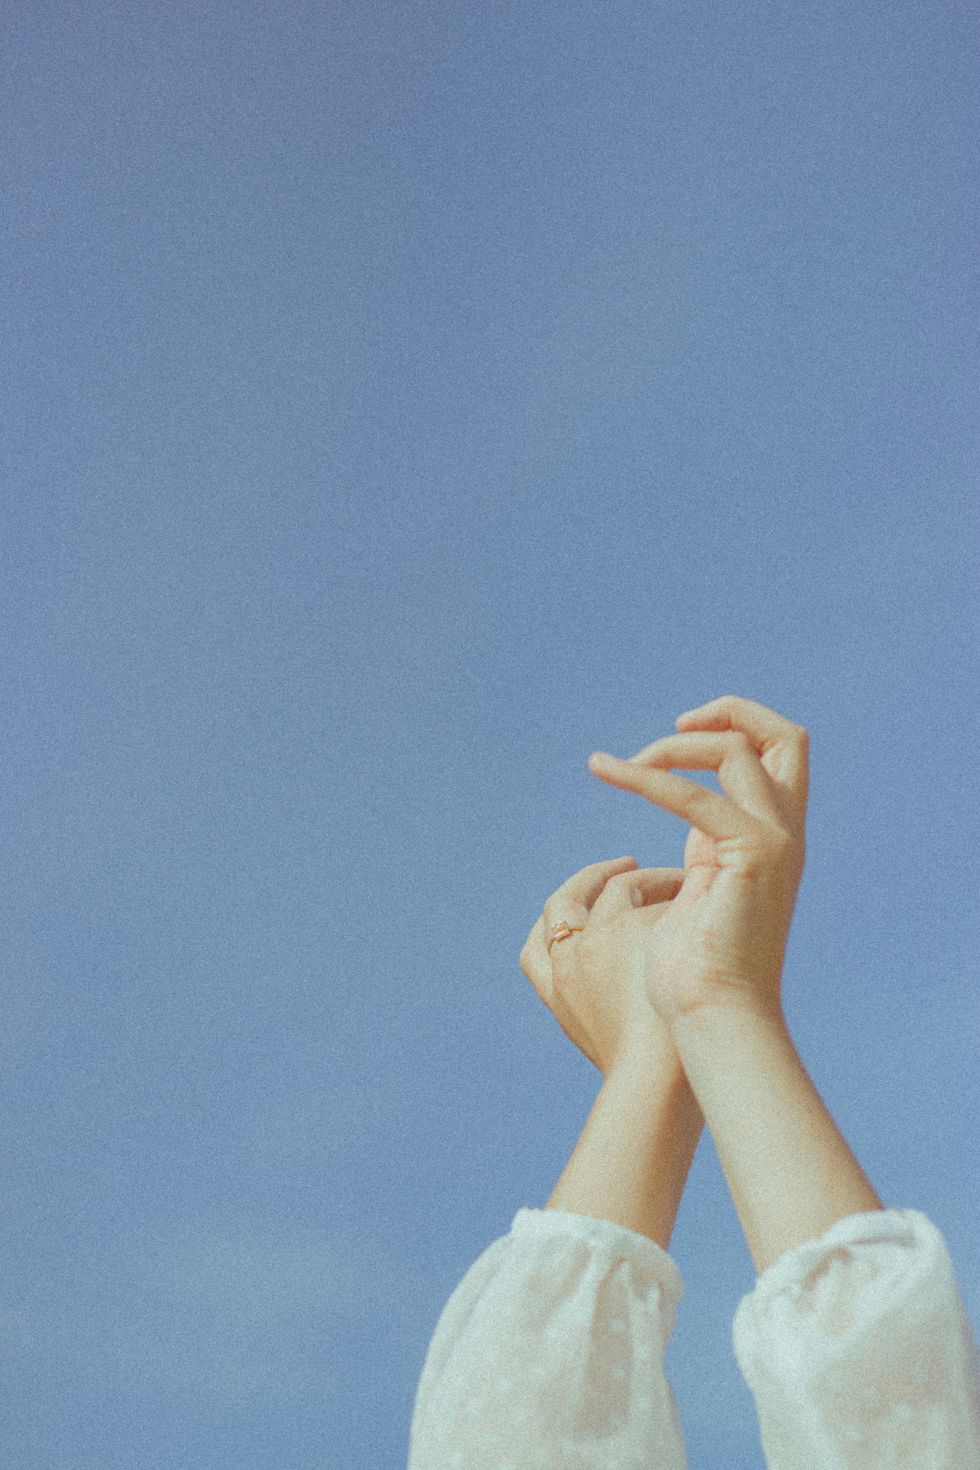 a pair of hands on a blue background